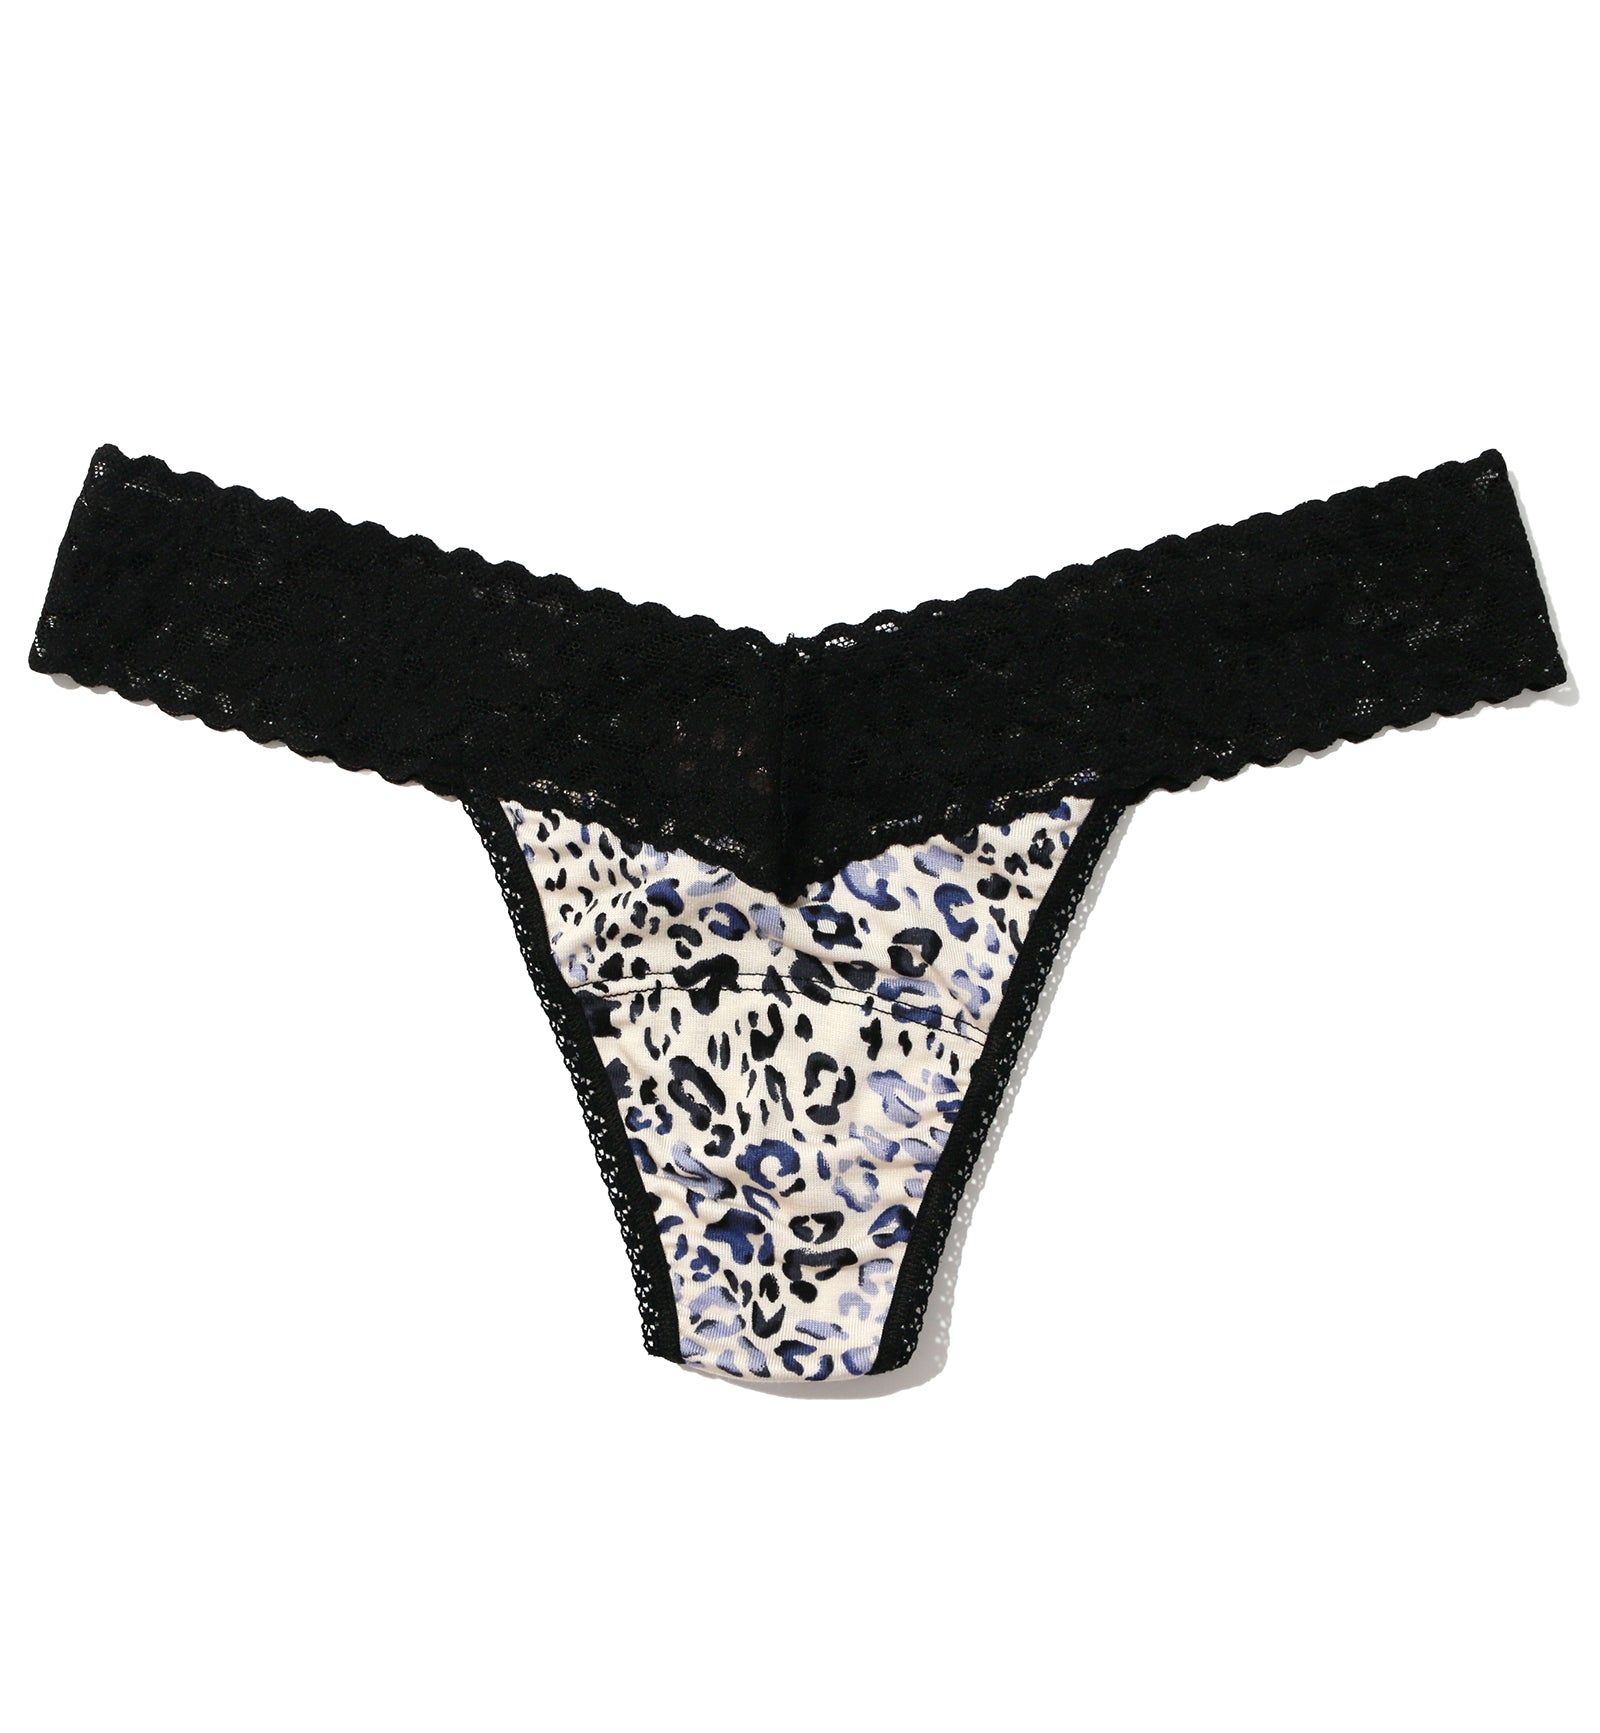 Hanky Panky Dream Printed Low Rise Thong (PR681004),Spotted - Spotted,One Size